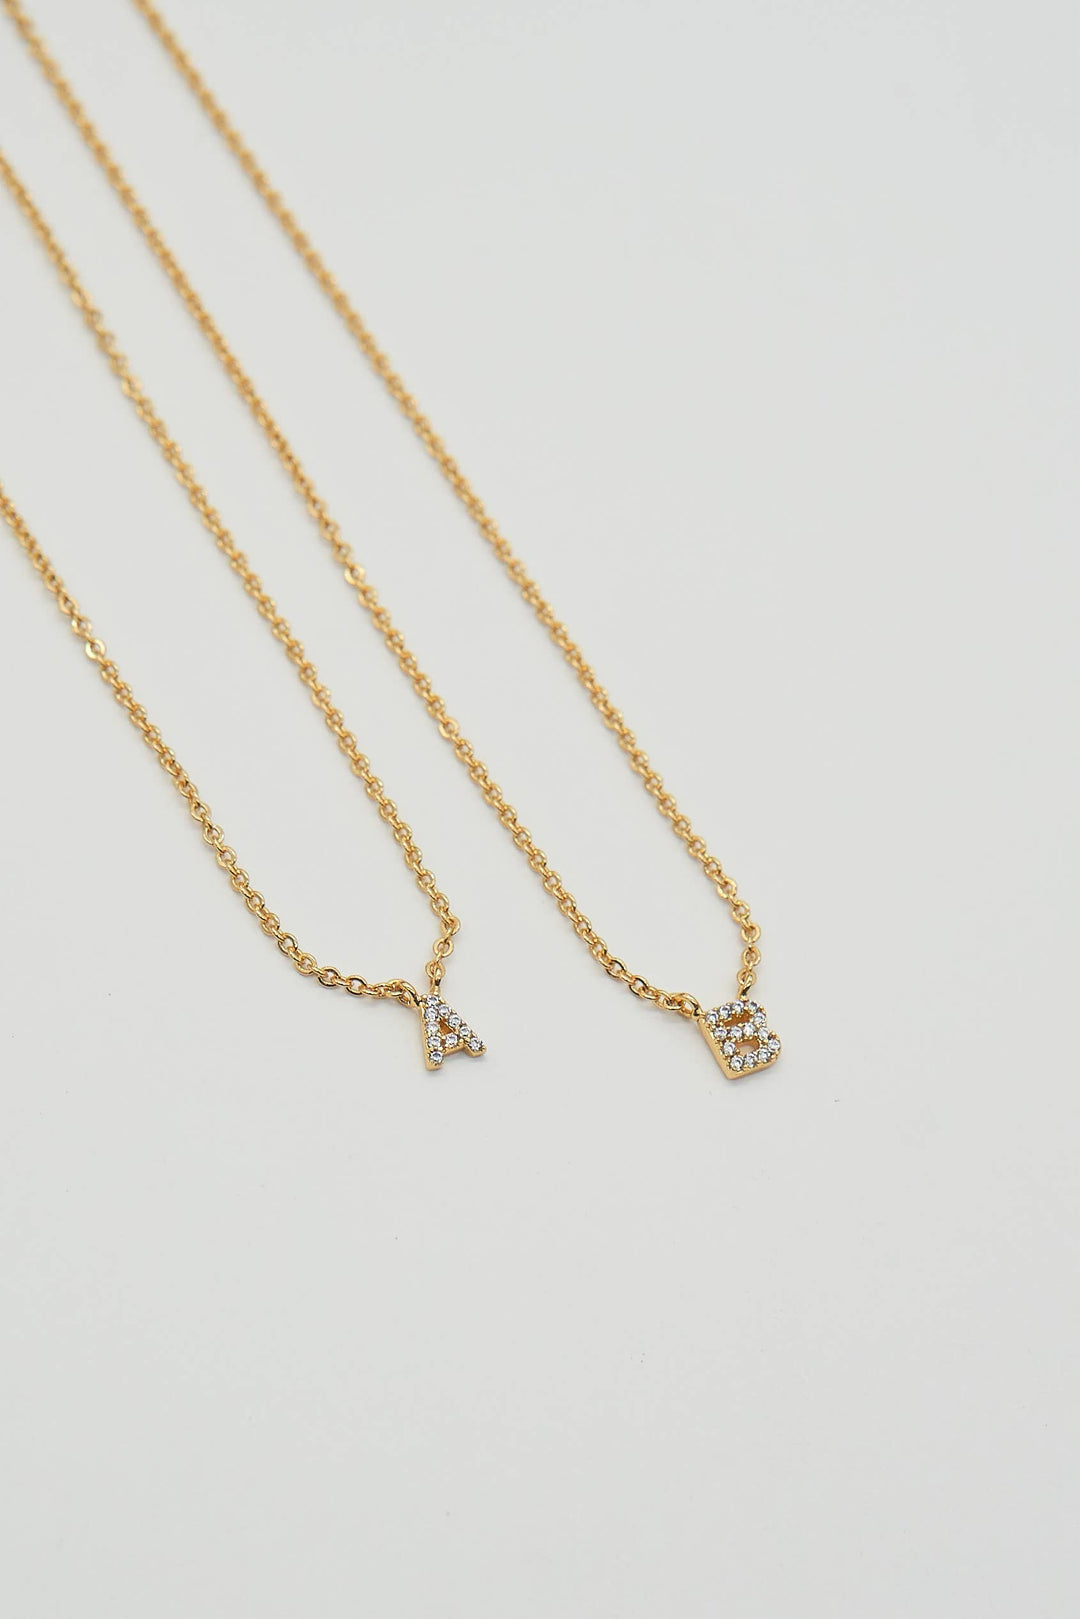 Shiny Initial Necklace: Holiday Favorite!: R